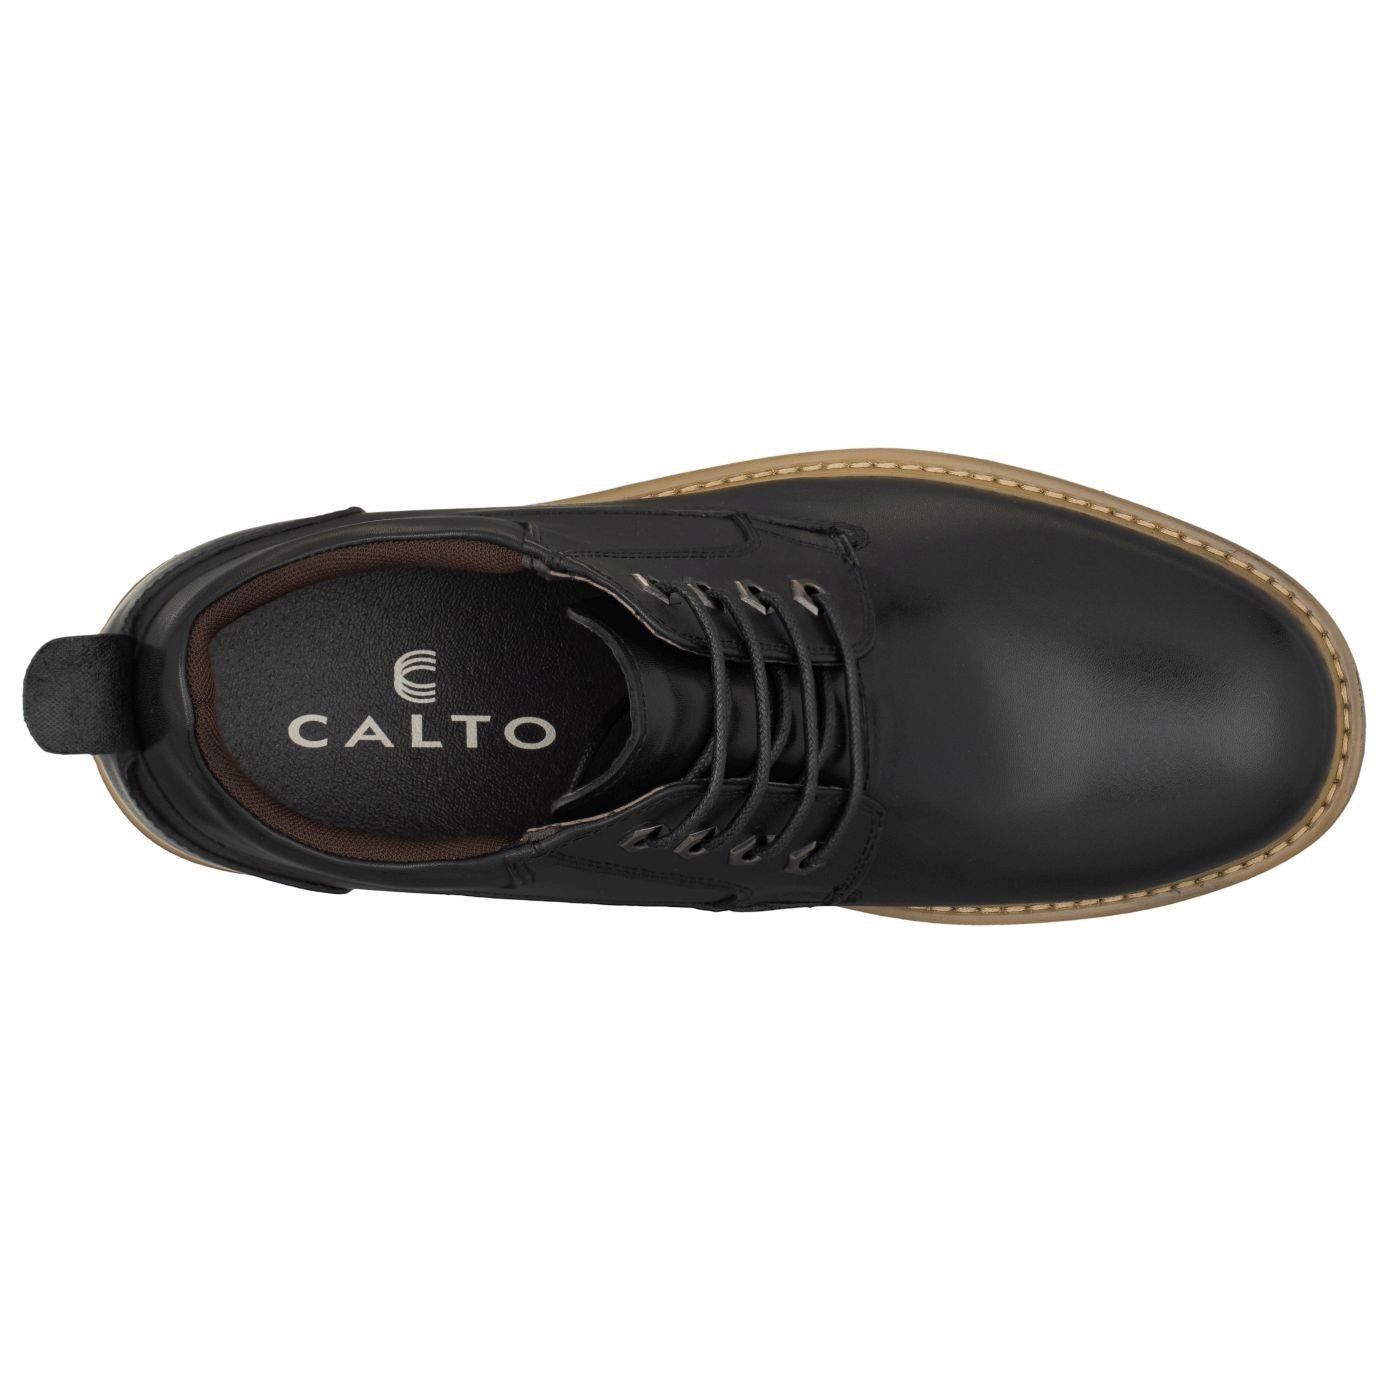 Elevator shoes height increase CALTO - S23022 - 3.2 Inches Taller (Black)